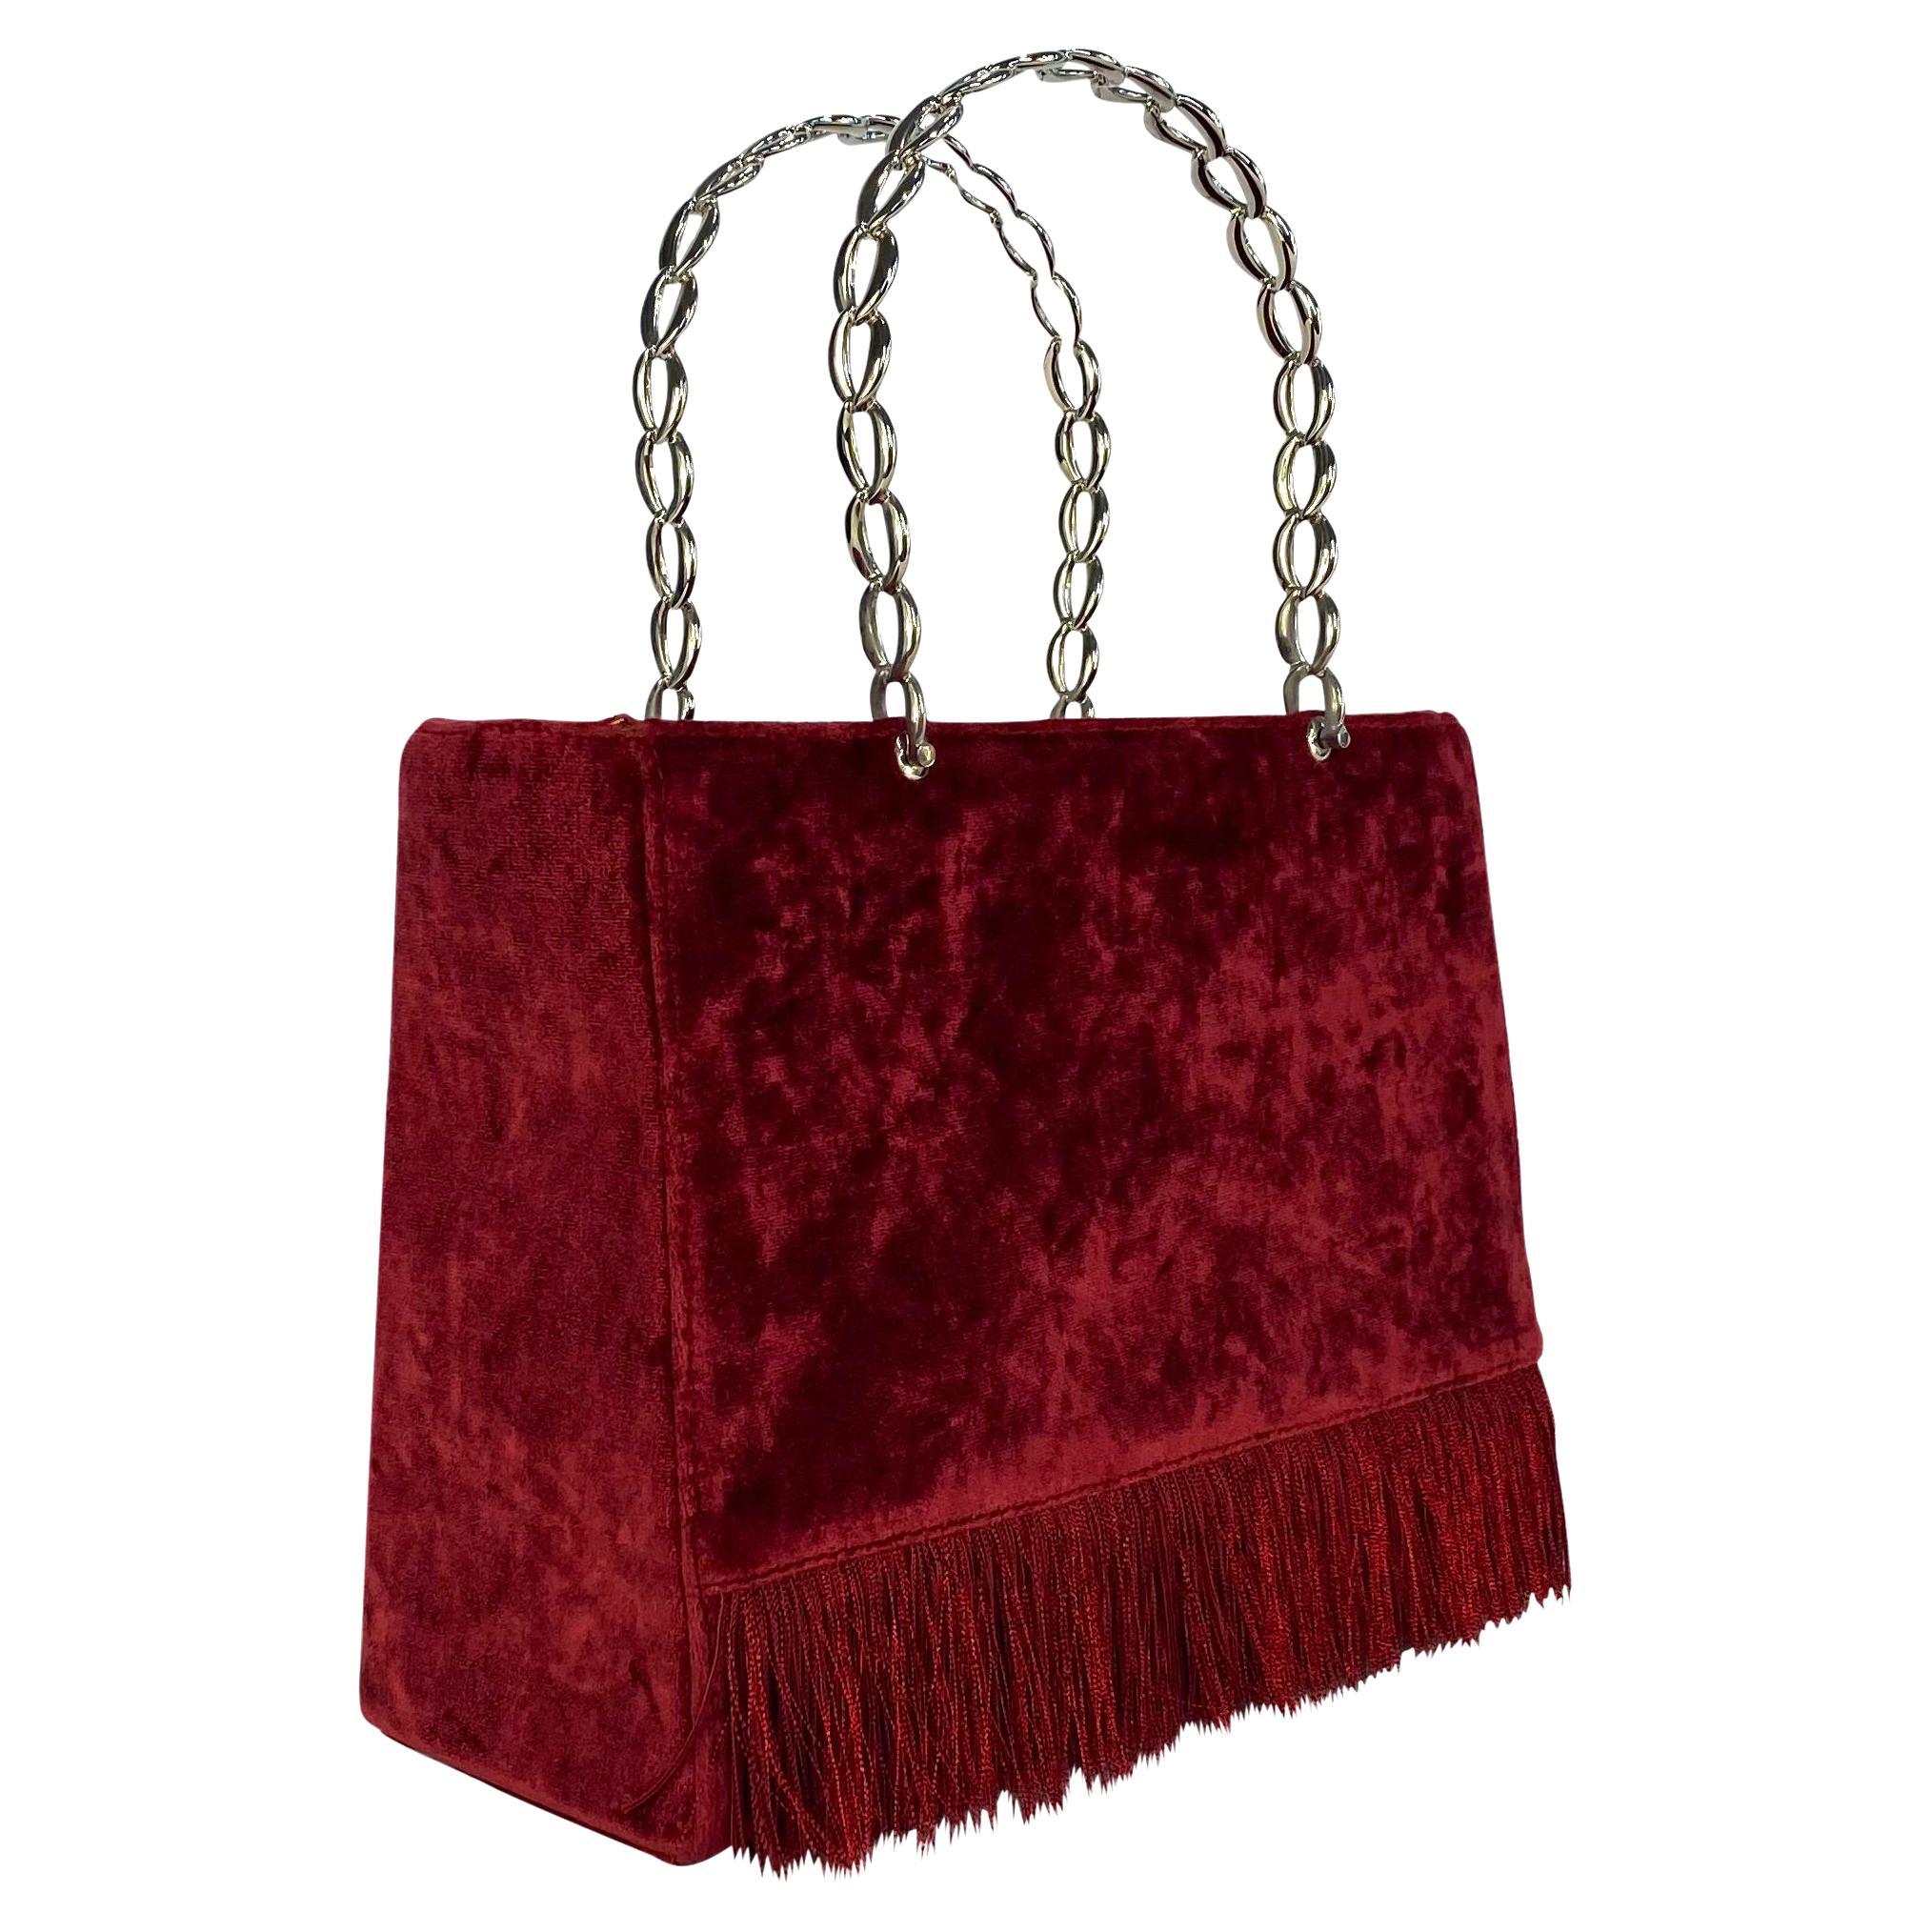 S/S 1998 Christian Dior by John Galliano Red Velvet Fringe Metal Handle Lady Bag For Sale 1